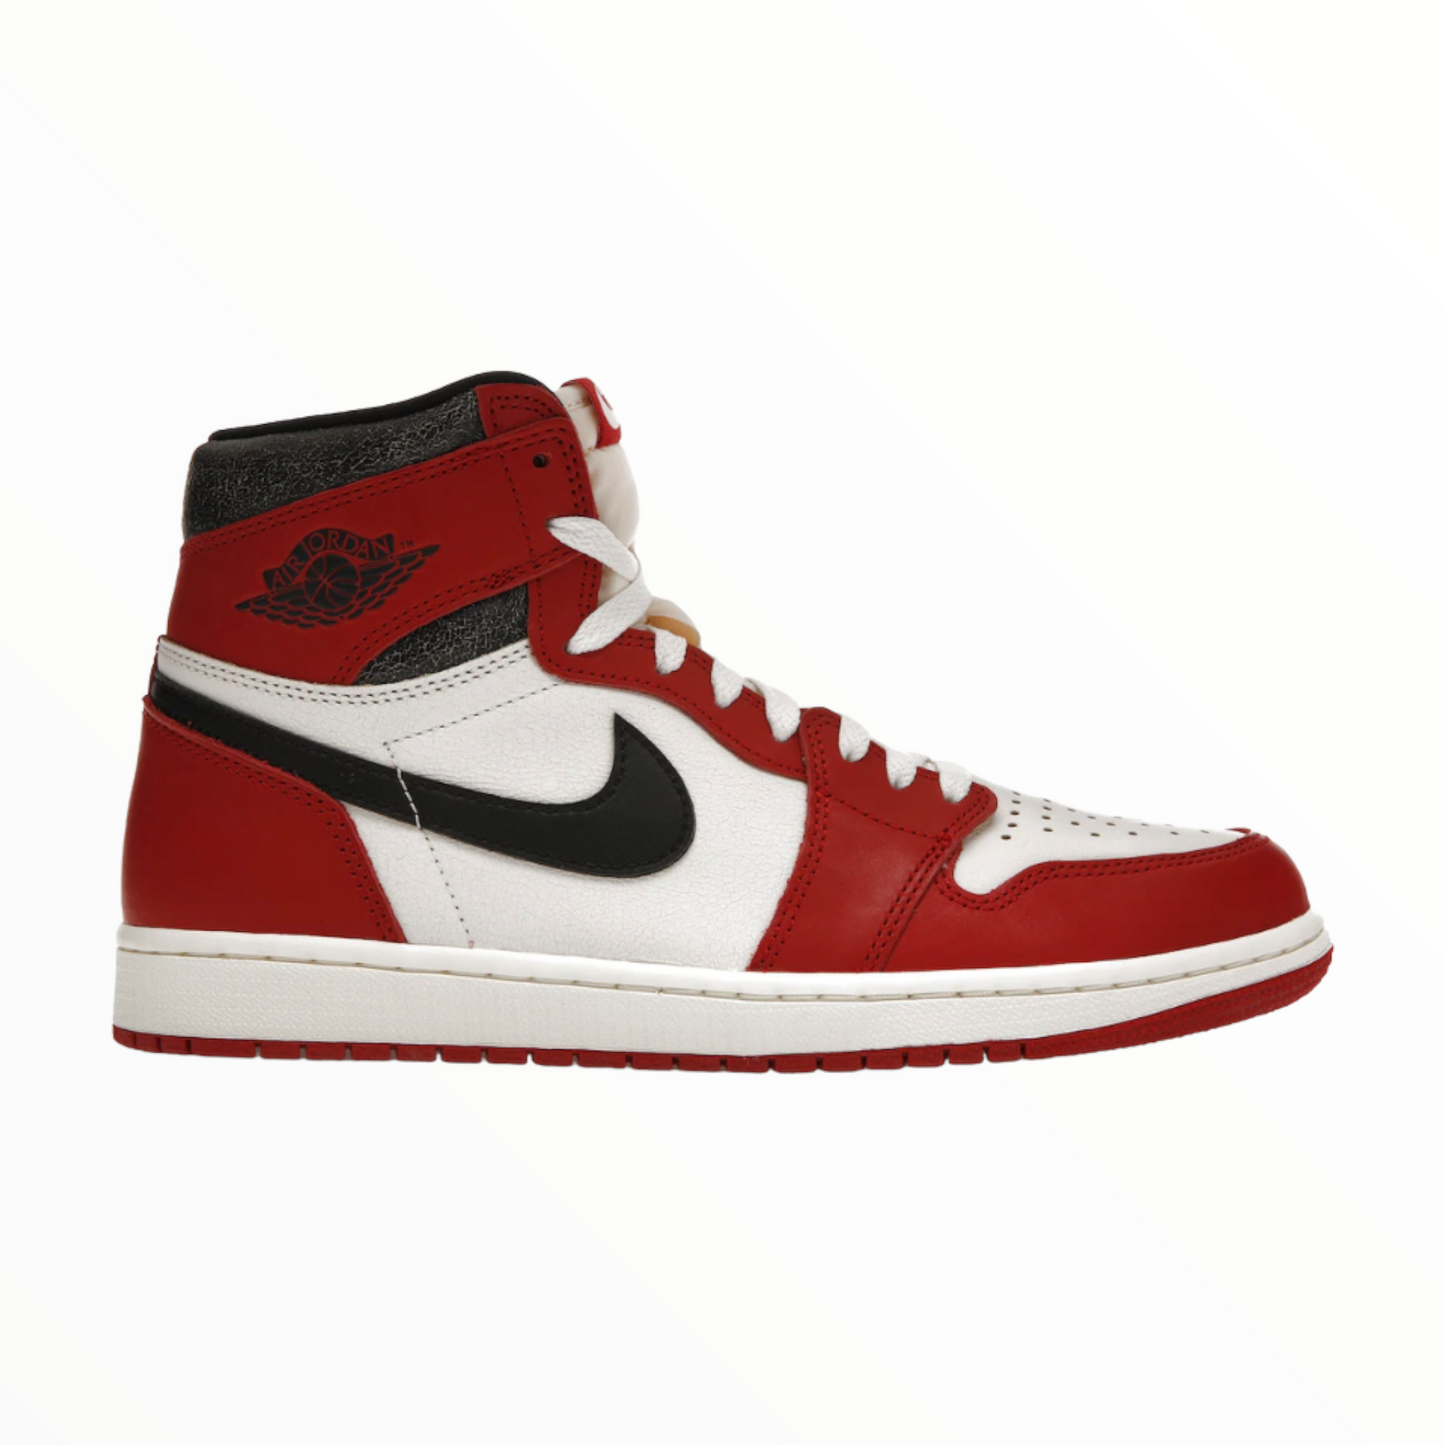 Air Jordan 1 Retro High OG Chicago ”Lost and Found”